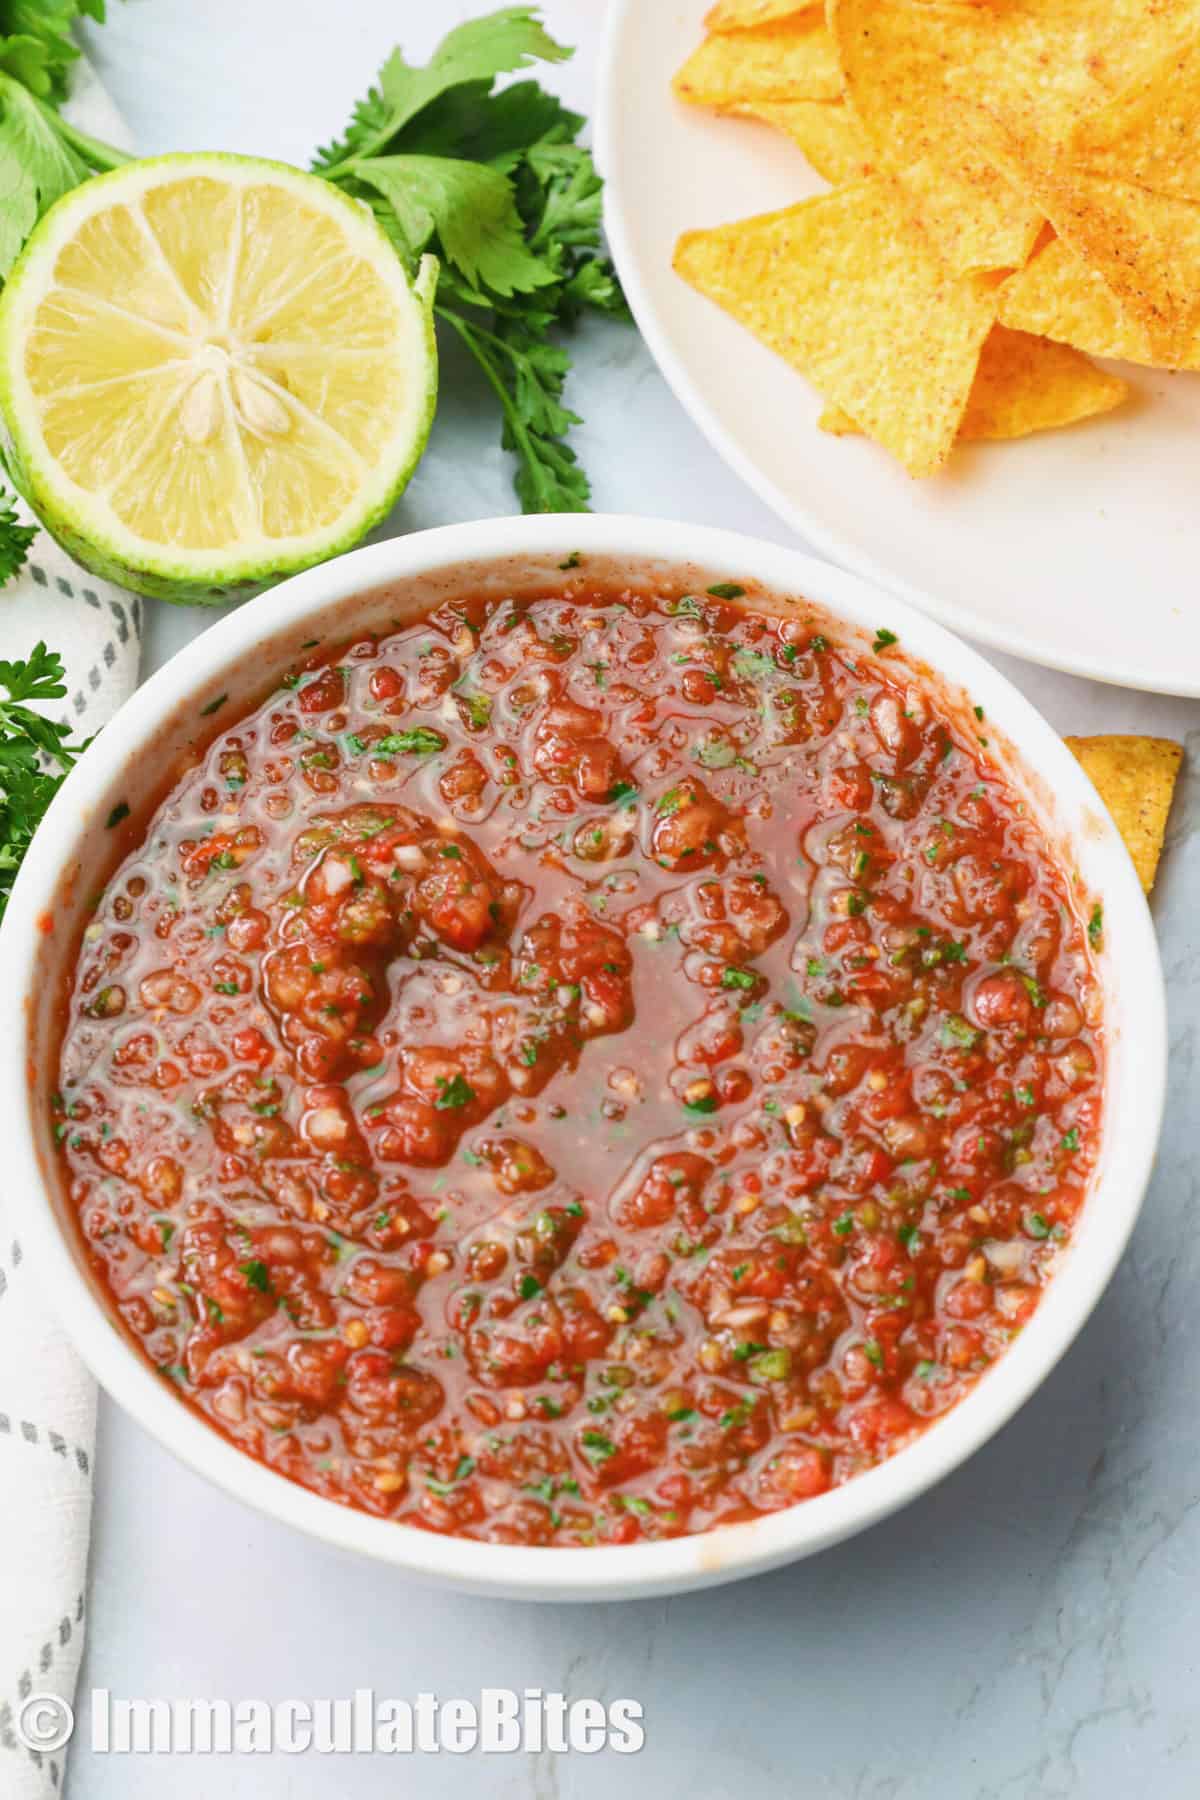 Restaurant-style salsa in a white bowl with homemade tortilla chips